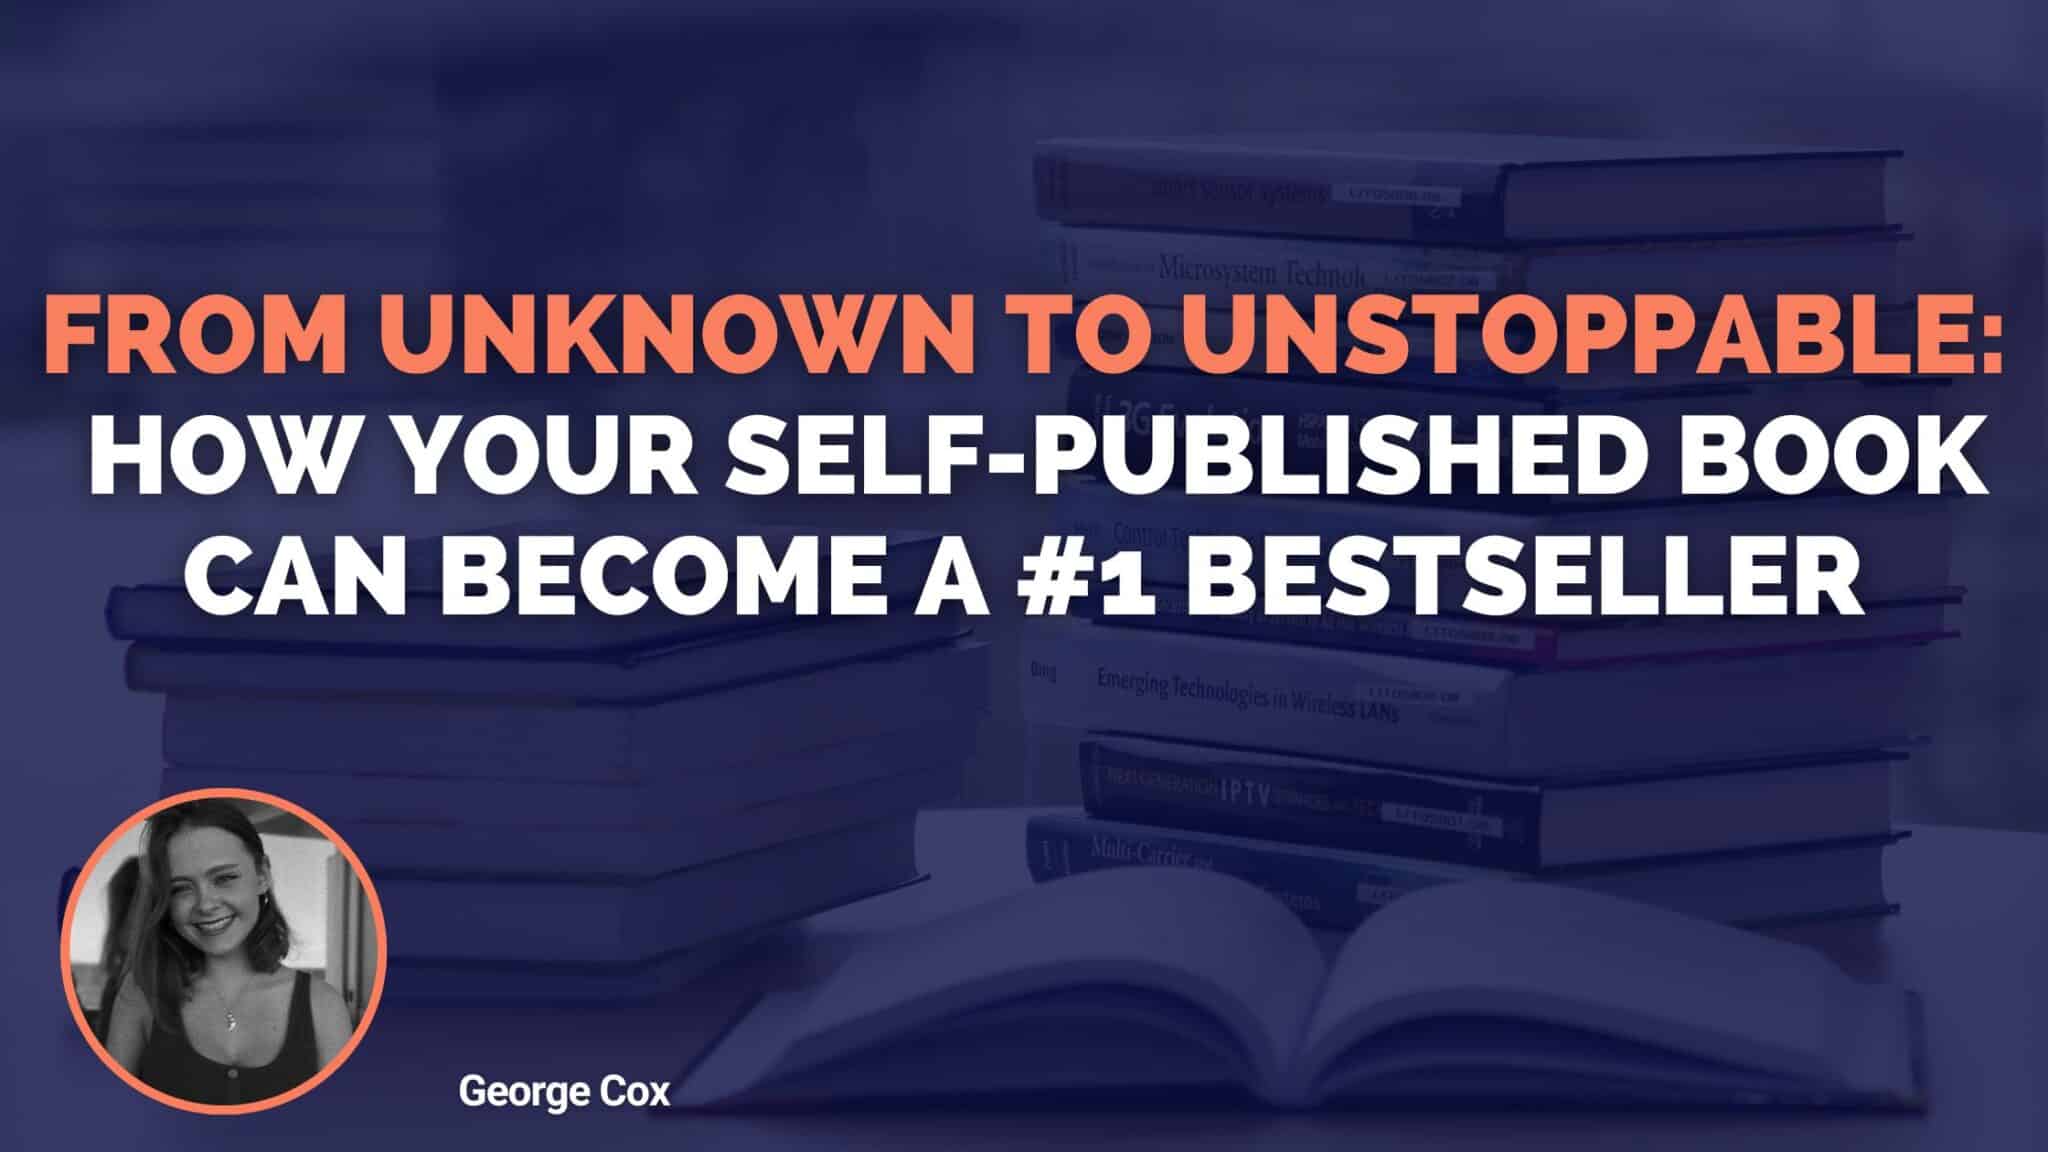 From Unknown To Unstoppable: How Your Self-Published Book Can Become A #1 Bestseller